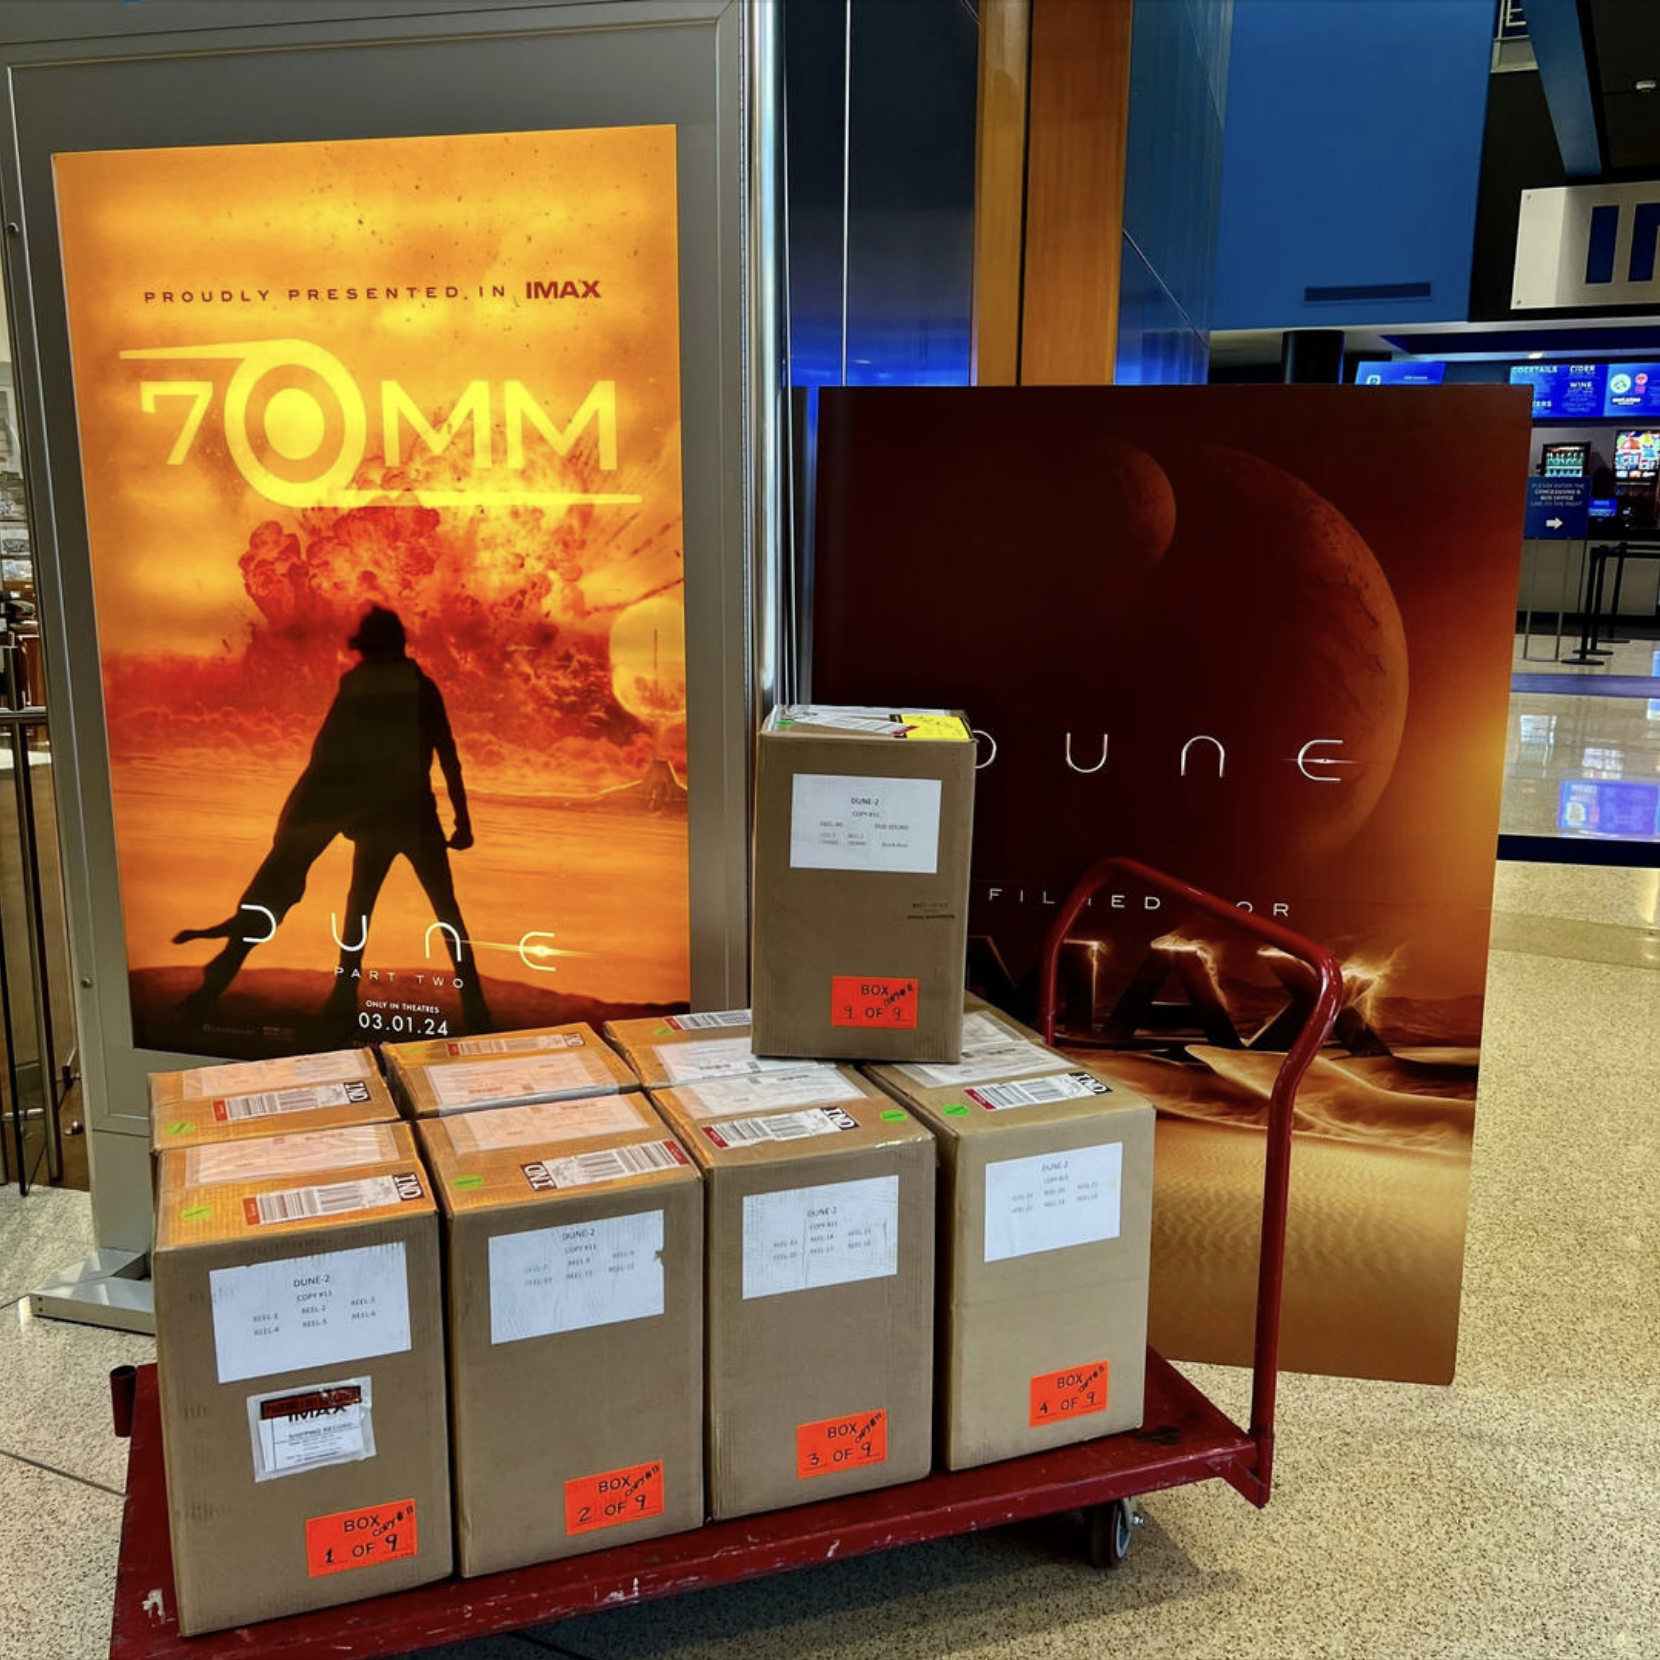 A tray cart carrying nine boxes, in front of a large display advertising Dune Part Two in 70MM IMAX.